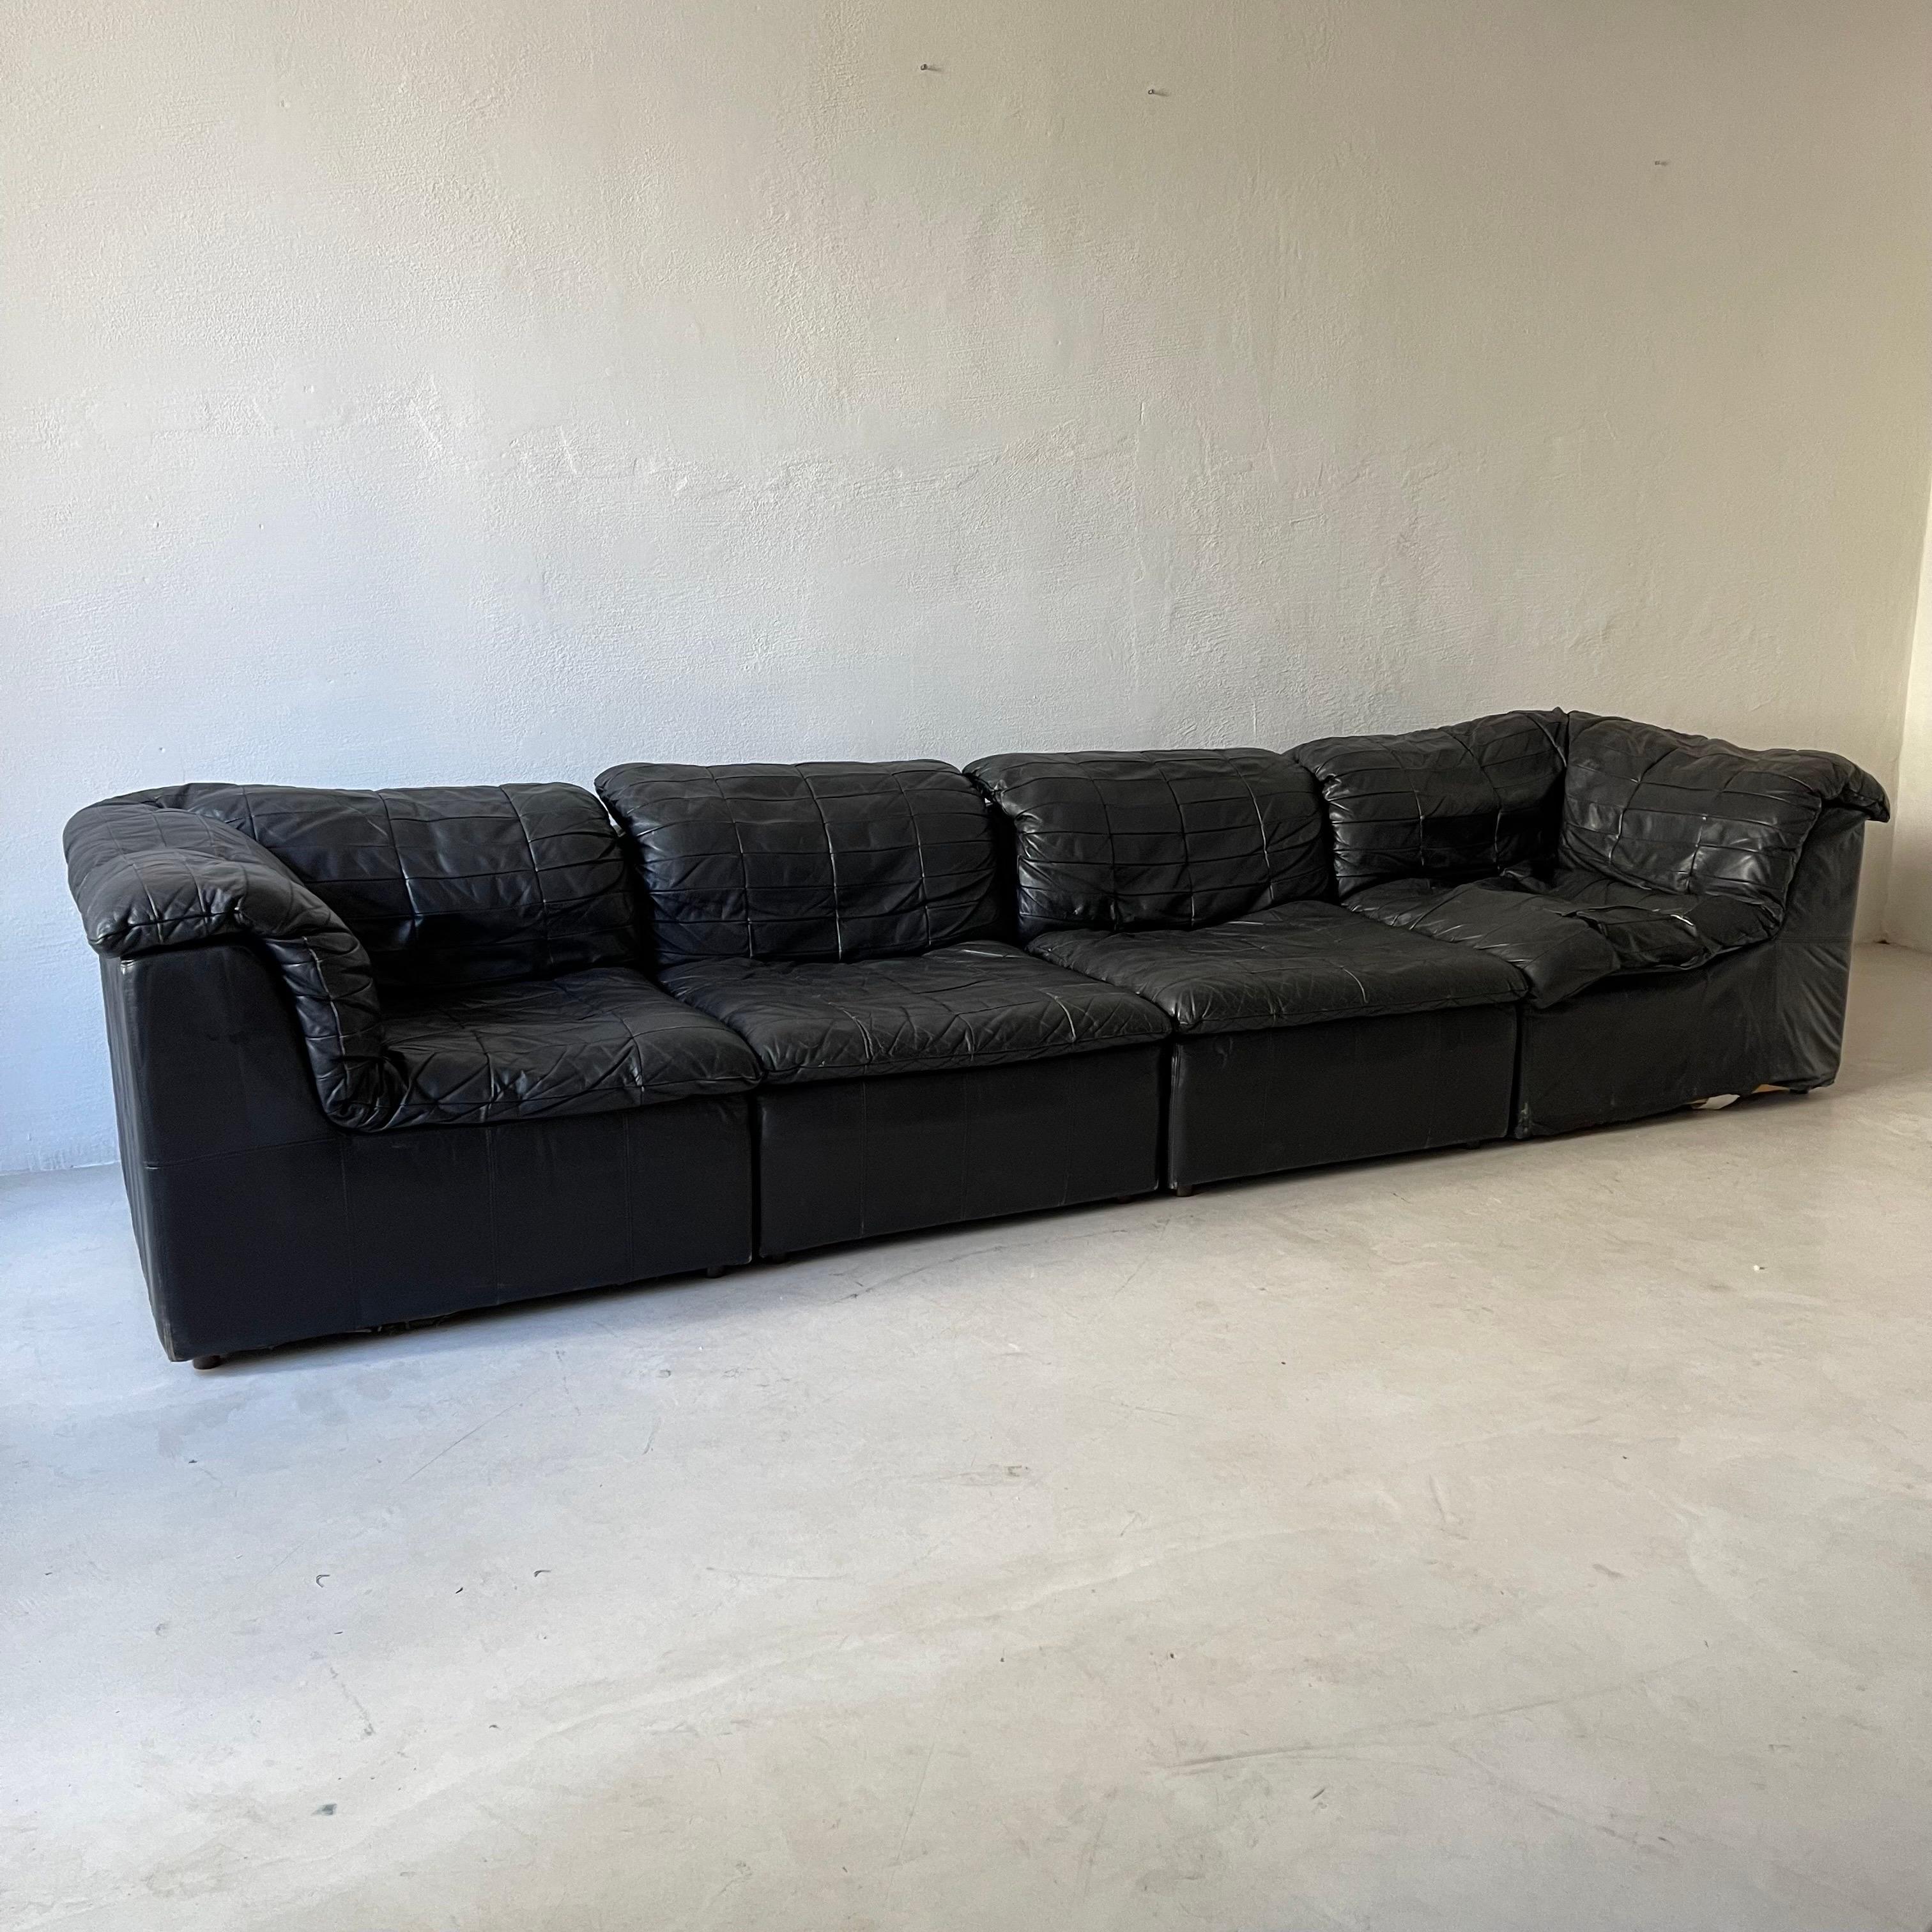 German Laauser Vintage Leather Patchwork Sectional Sofa Modular, 1970s For Sale